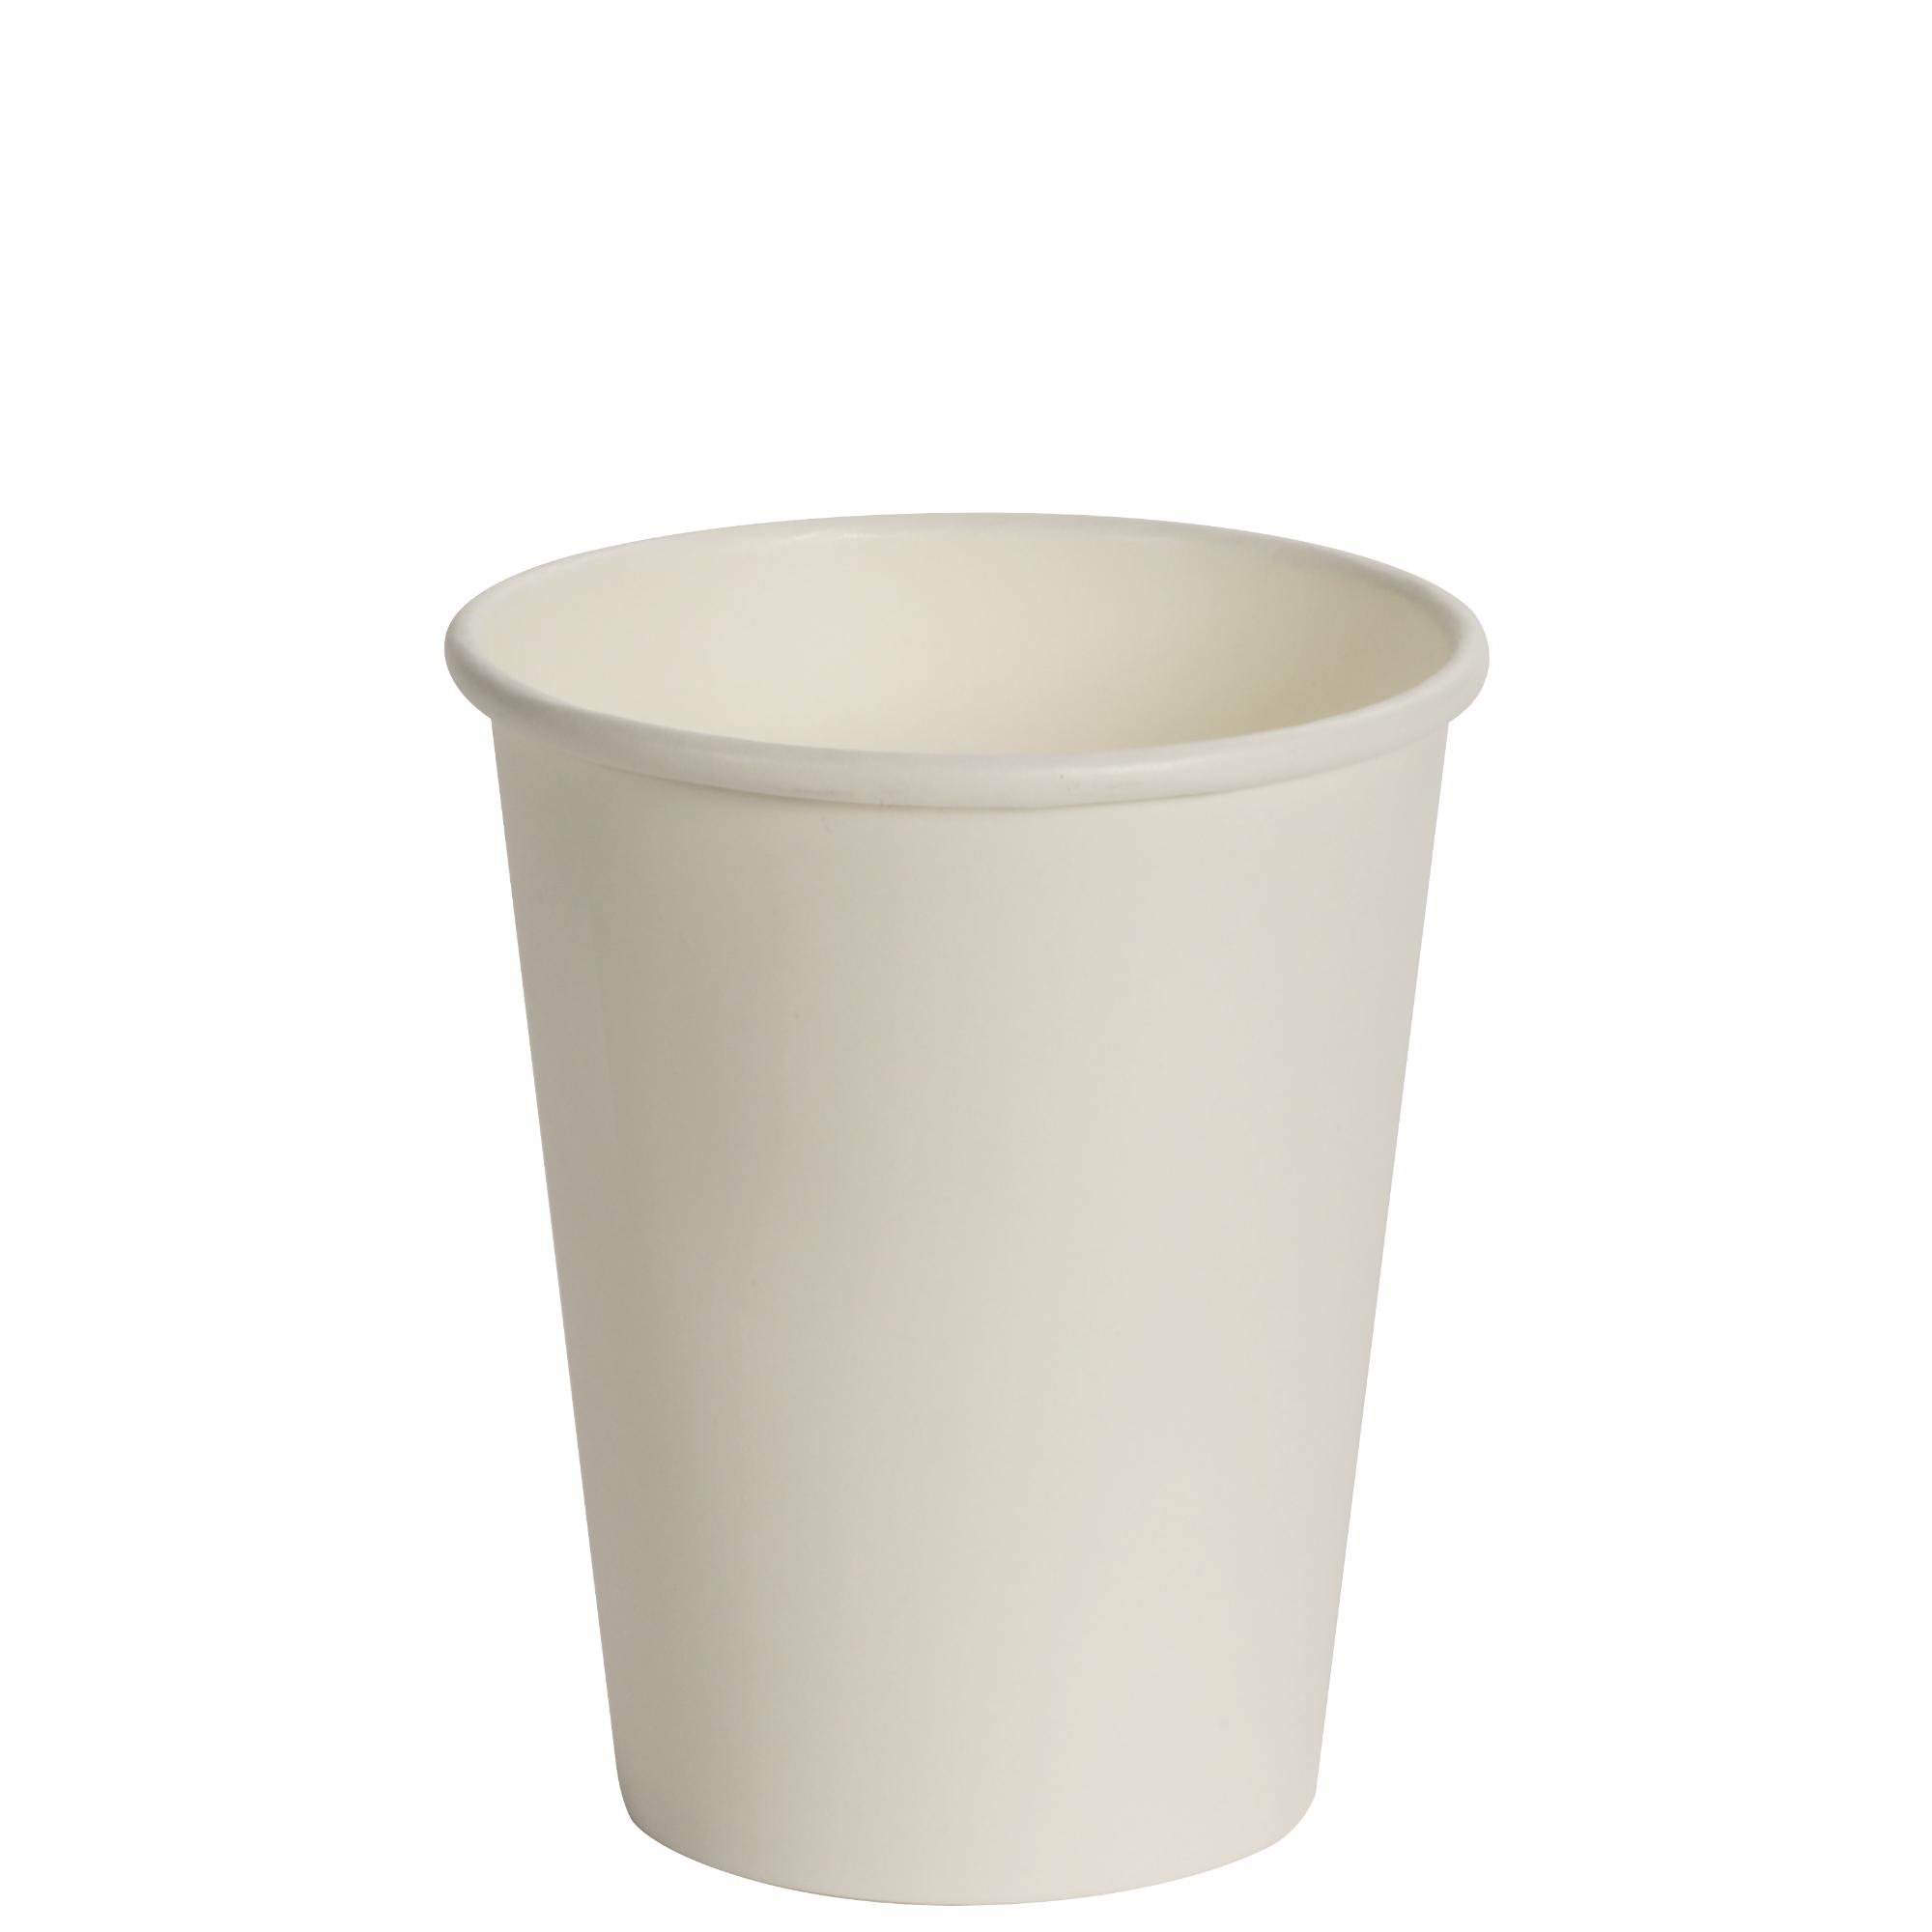 SMCUP-small-mixing-cup-catalogue-scale.jpg